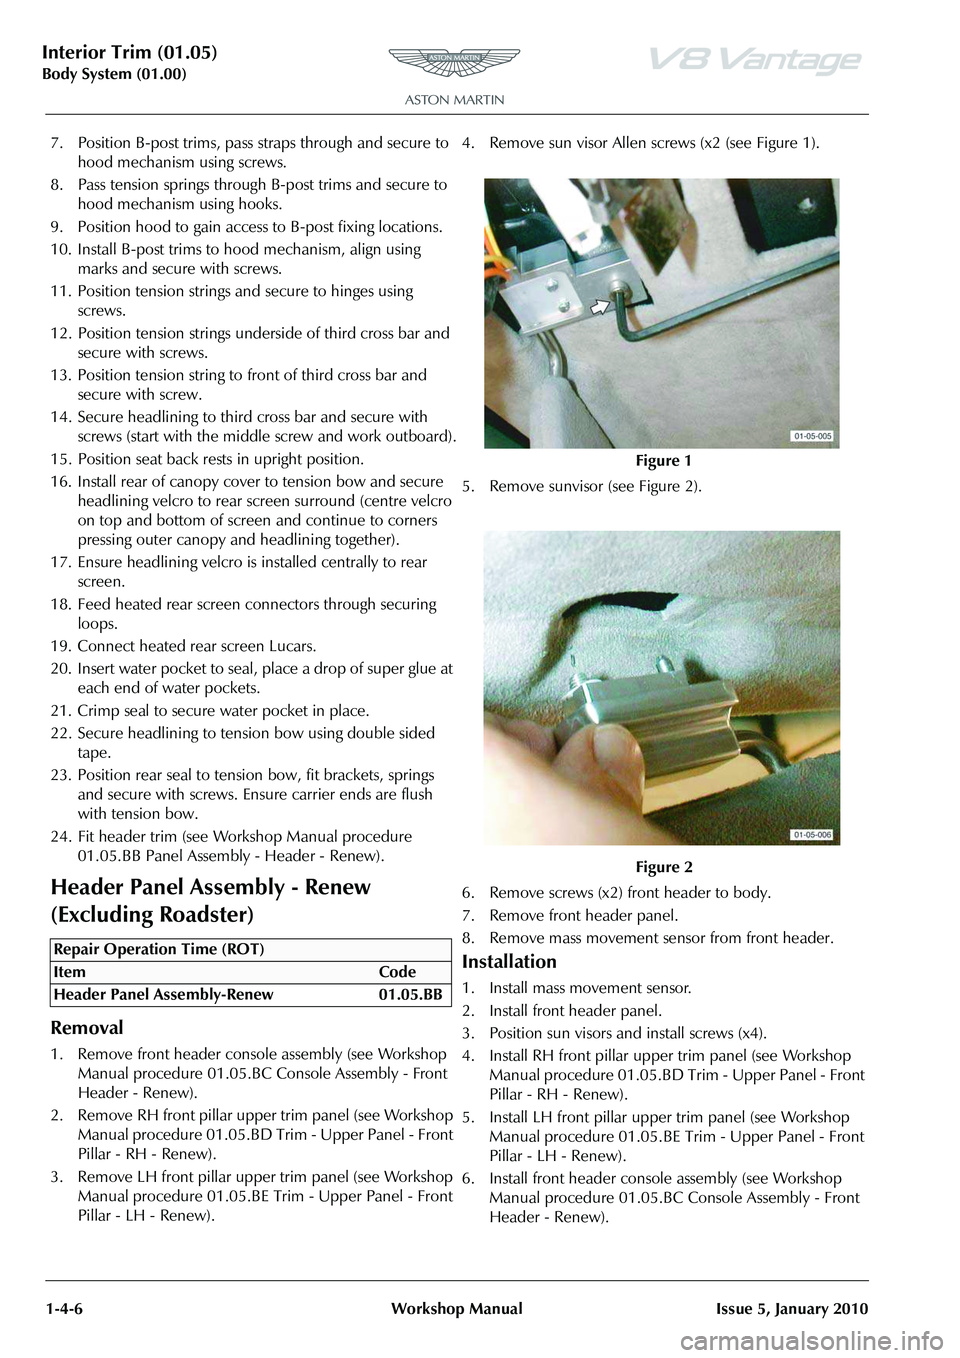 ASTON MARTIN V8 VANTAGE 2010  Workshop Manual Interior Trim (01.05)
Body System (01.00)1-4-6 Workshop Manual Issue 5, January 2010
7. Position B-post trims, pass straps through and secure to  hood mechanism using screws.
8. Pass tension springs t